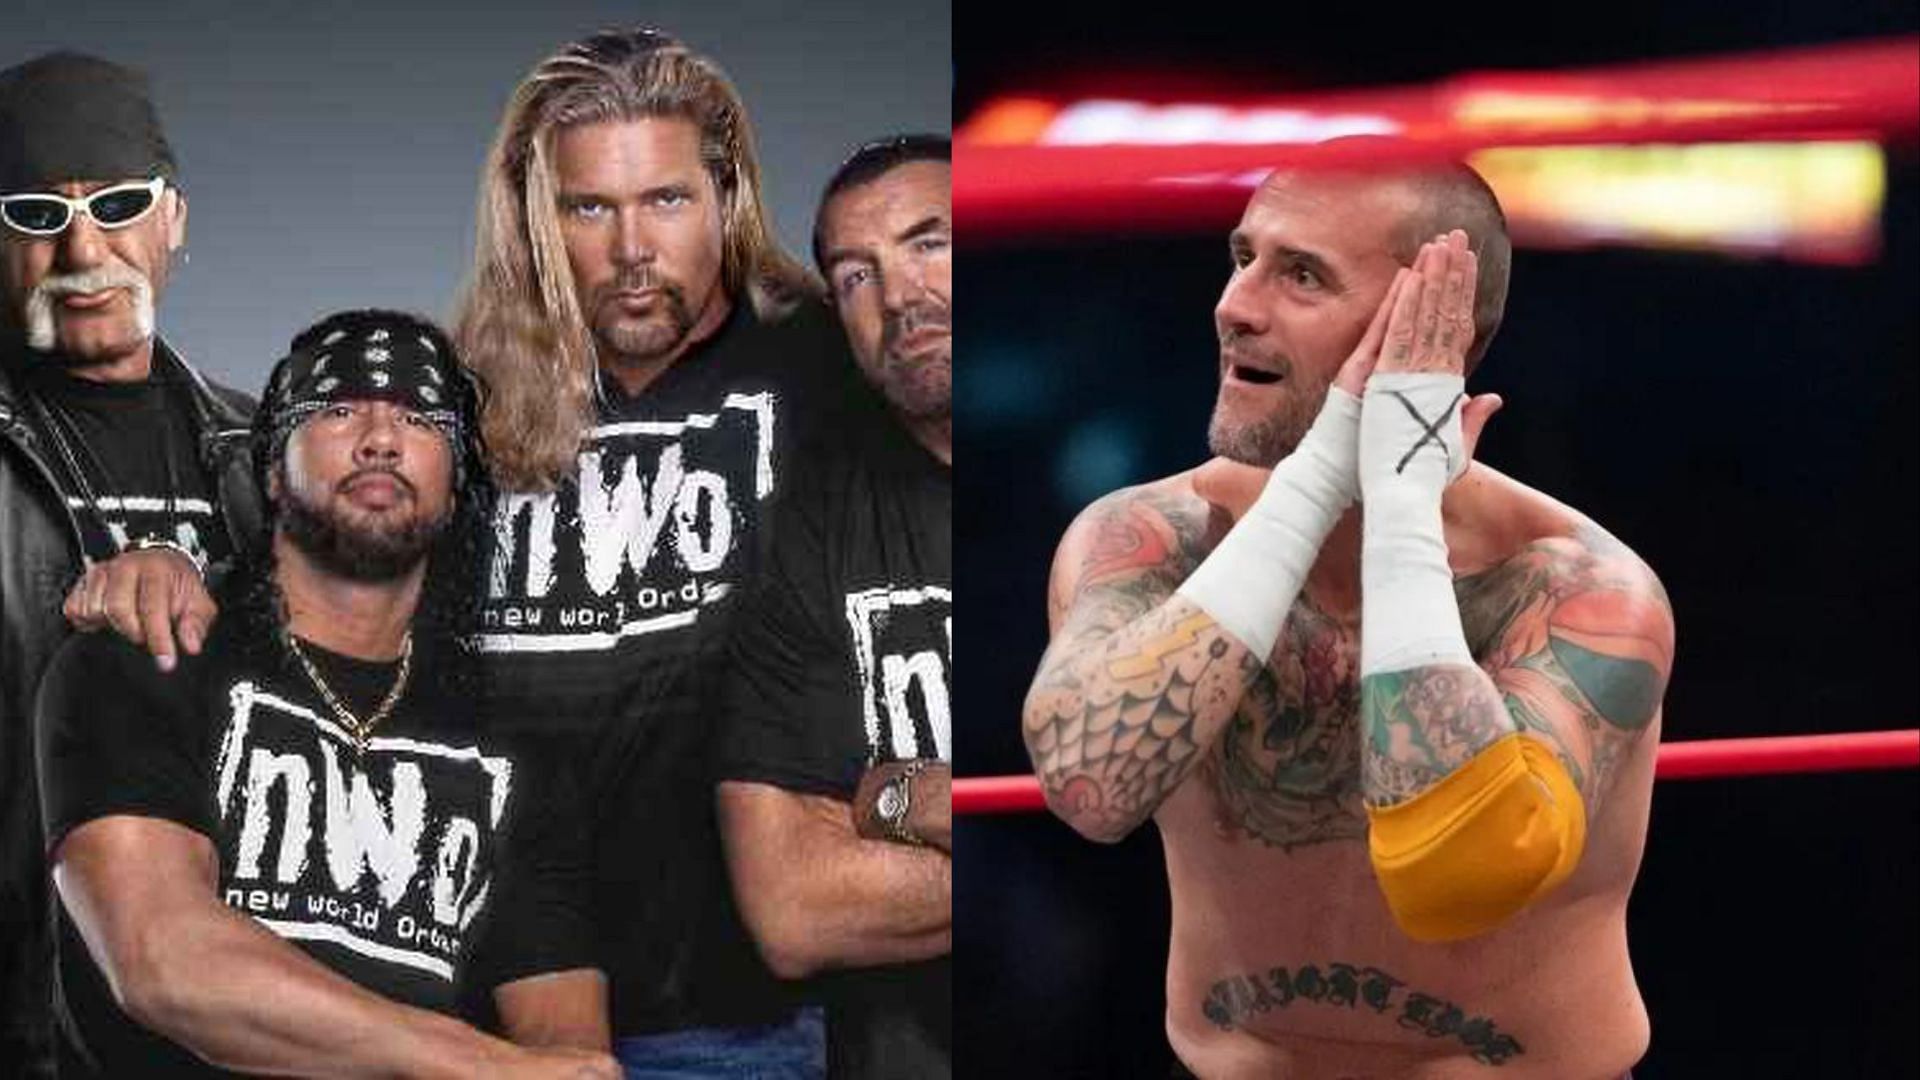 The New World Order and CM Punk